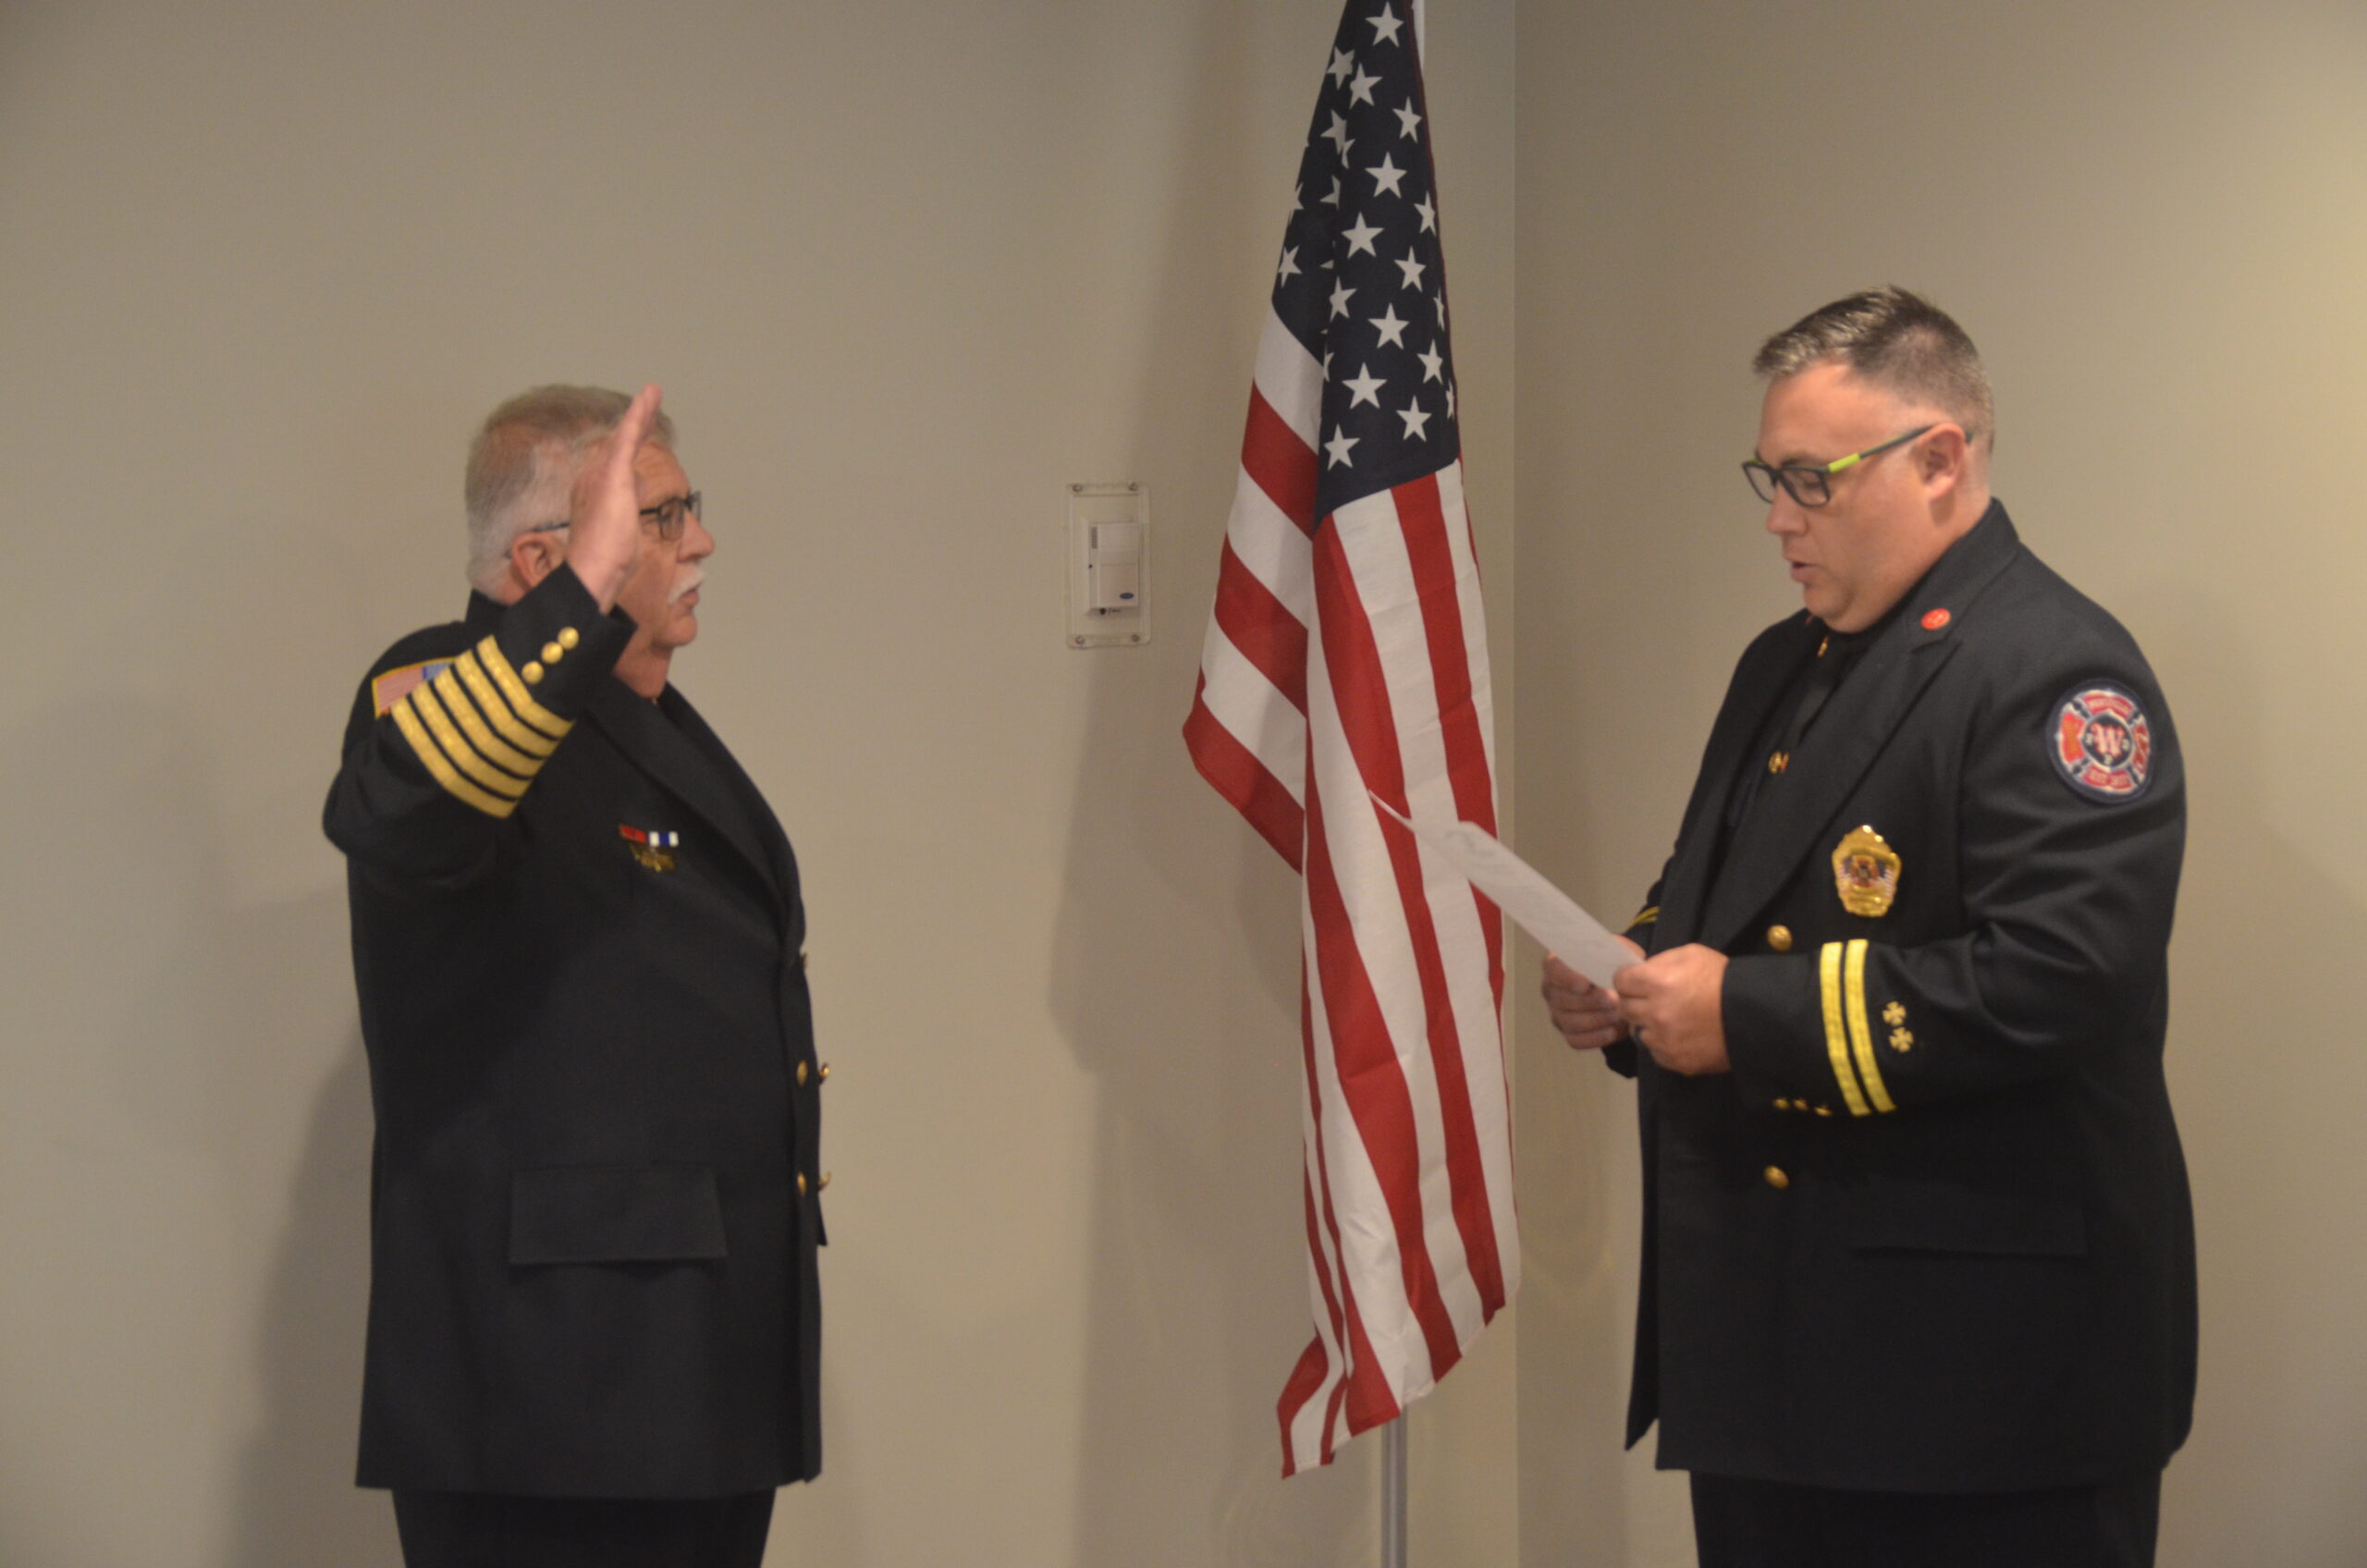 Veteran Fire Chief Takes Oath of Office as New LCFPD1 Fire Chief